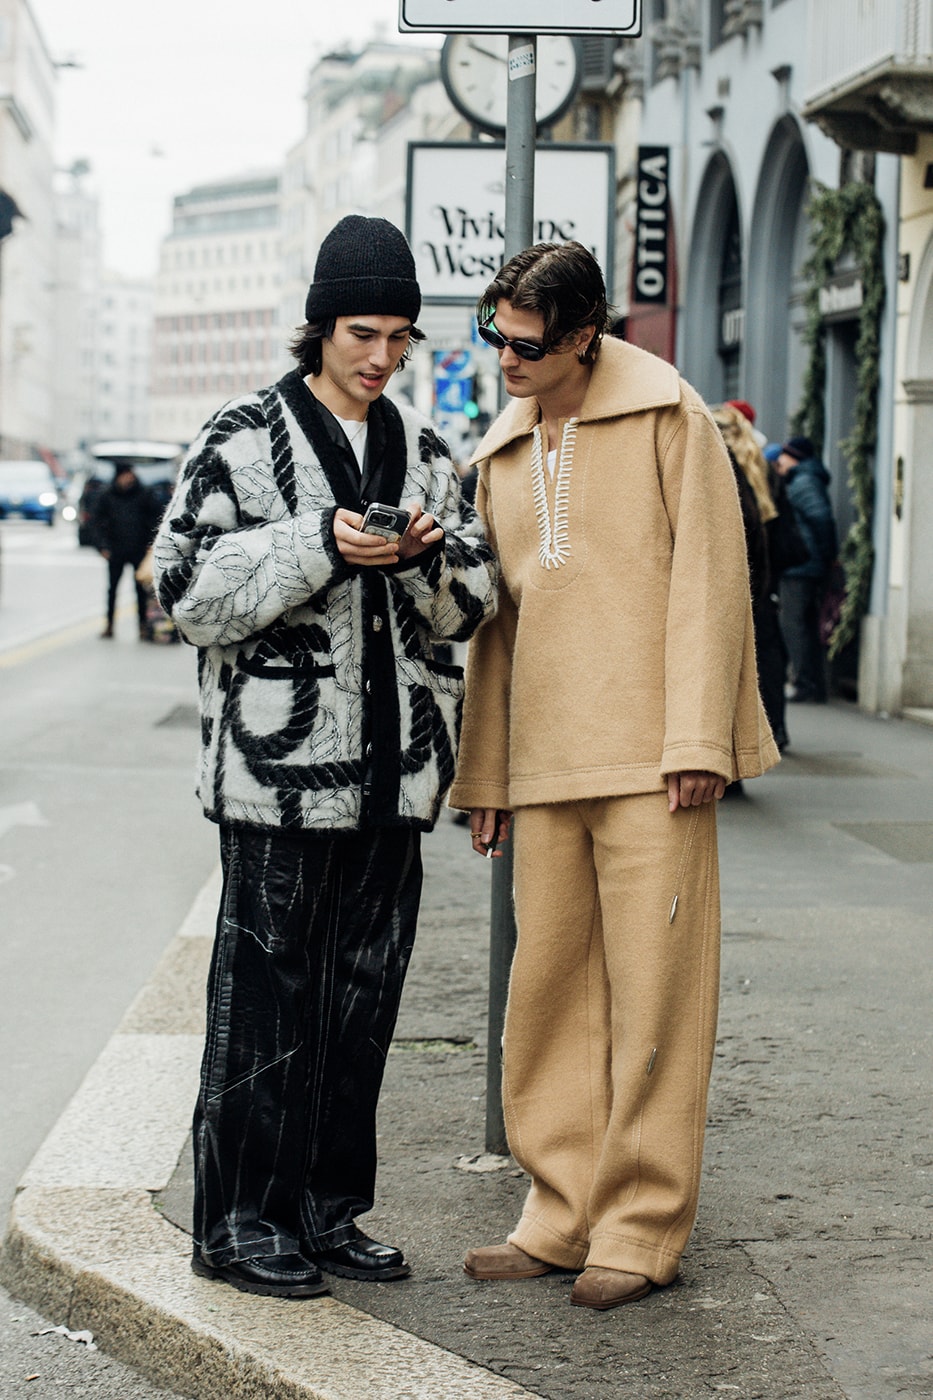 The Block Is Hot: New York Fashion Week Street Style Edition